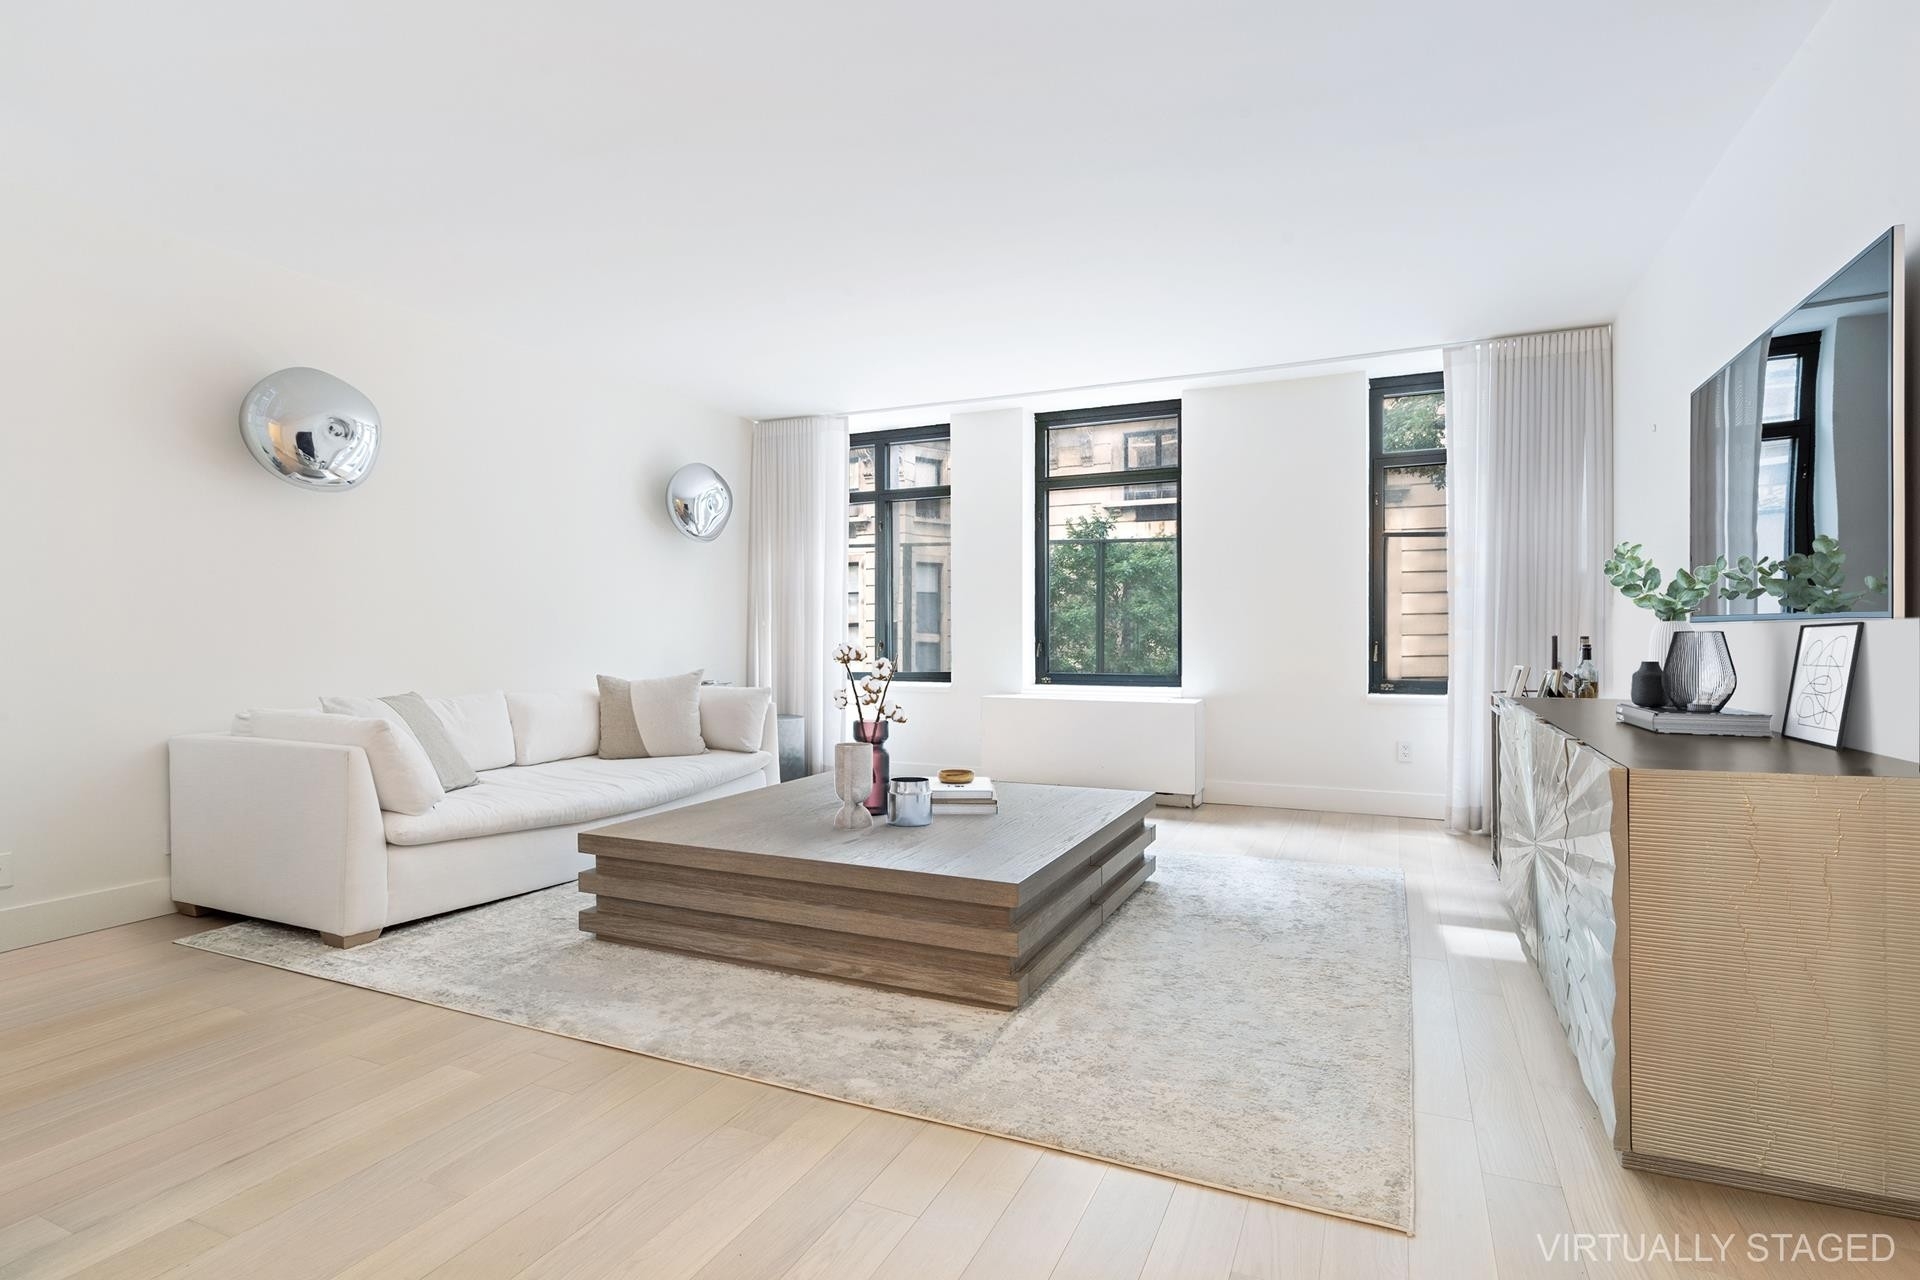 Condominium for Sale at 222 Rsd Condo, 222 RIVERSIDE DR, 2C Upper West Side, New York, New York 10025